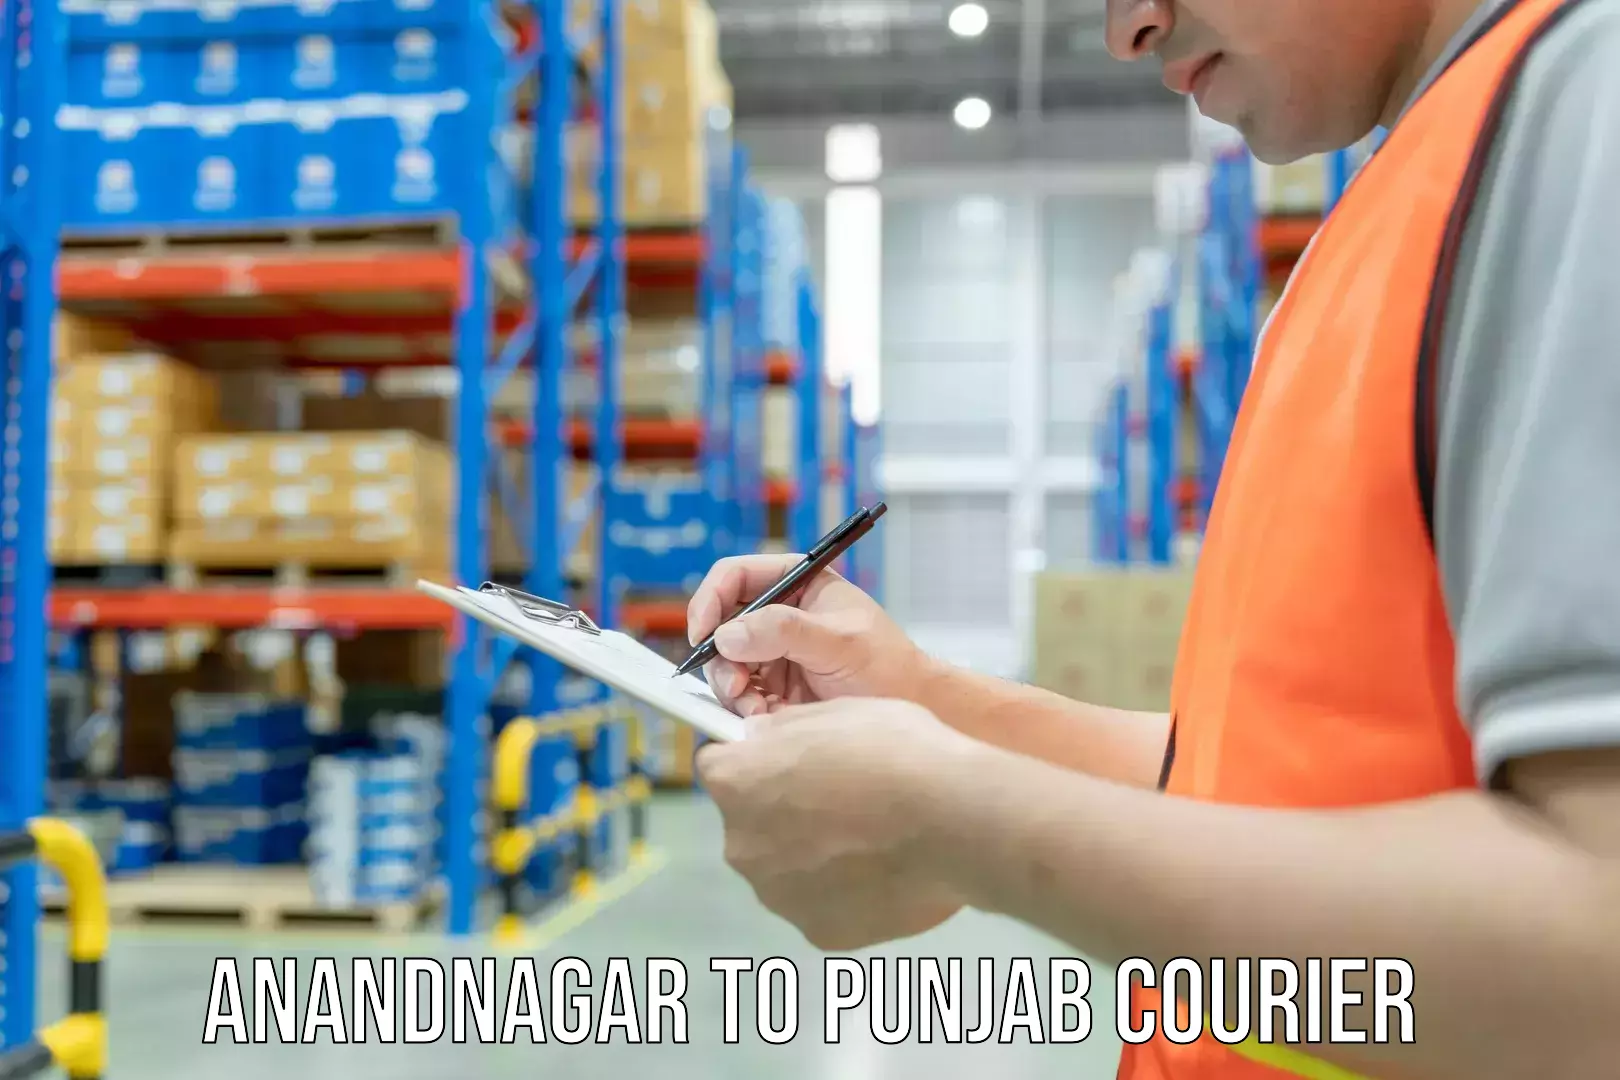 Automated parcel services Anandnagar to Punjab